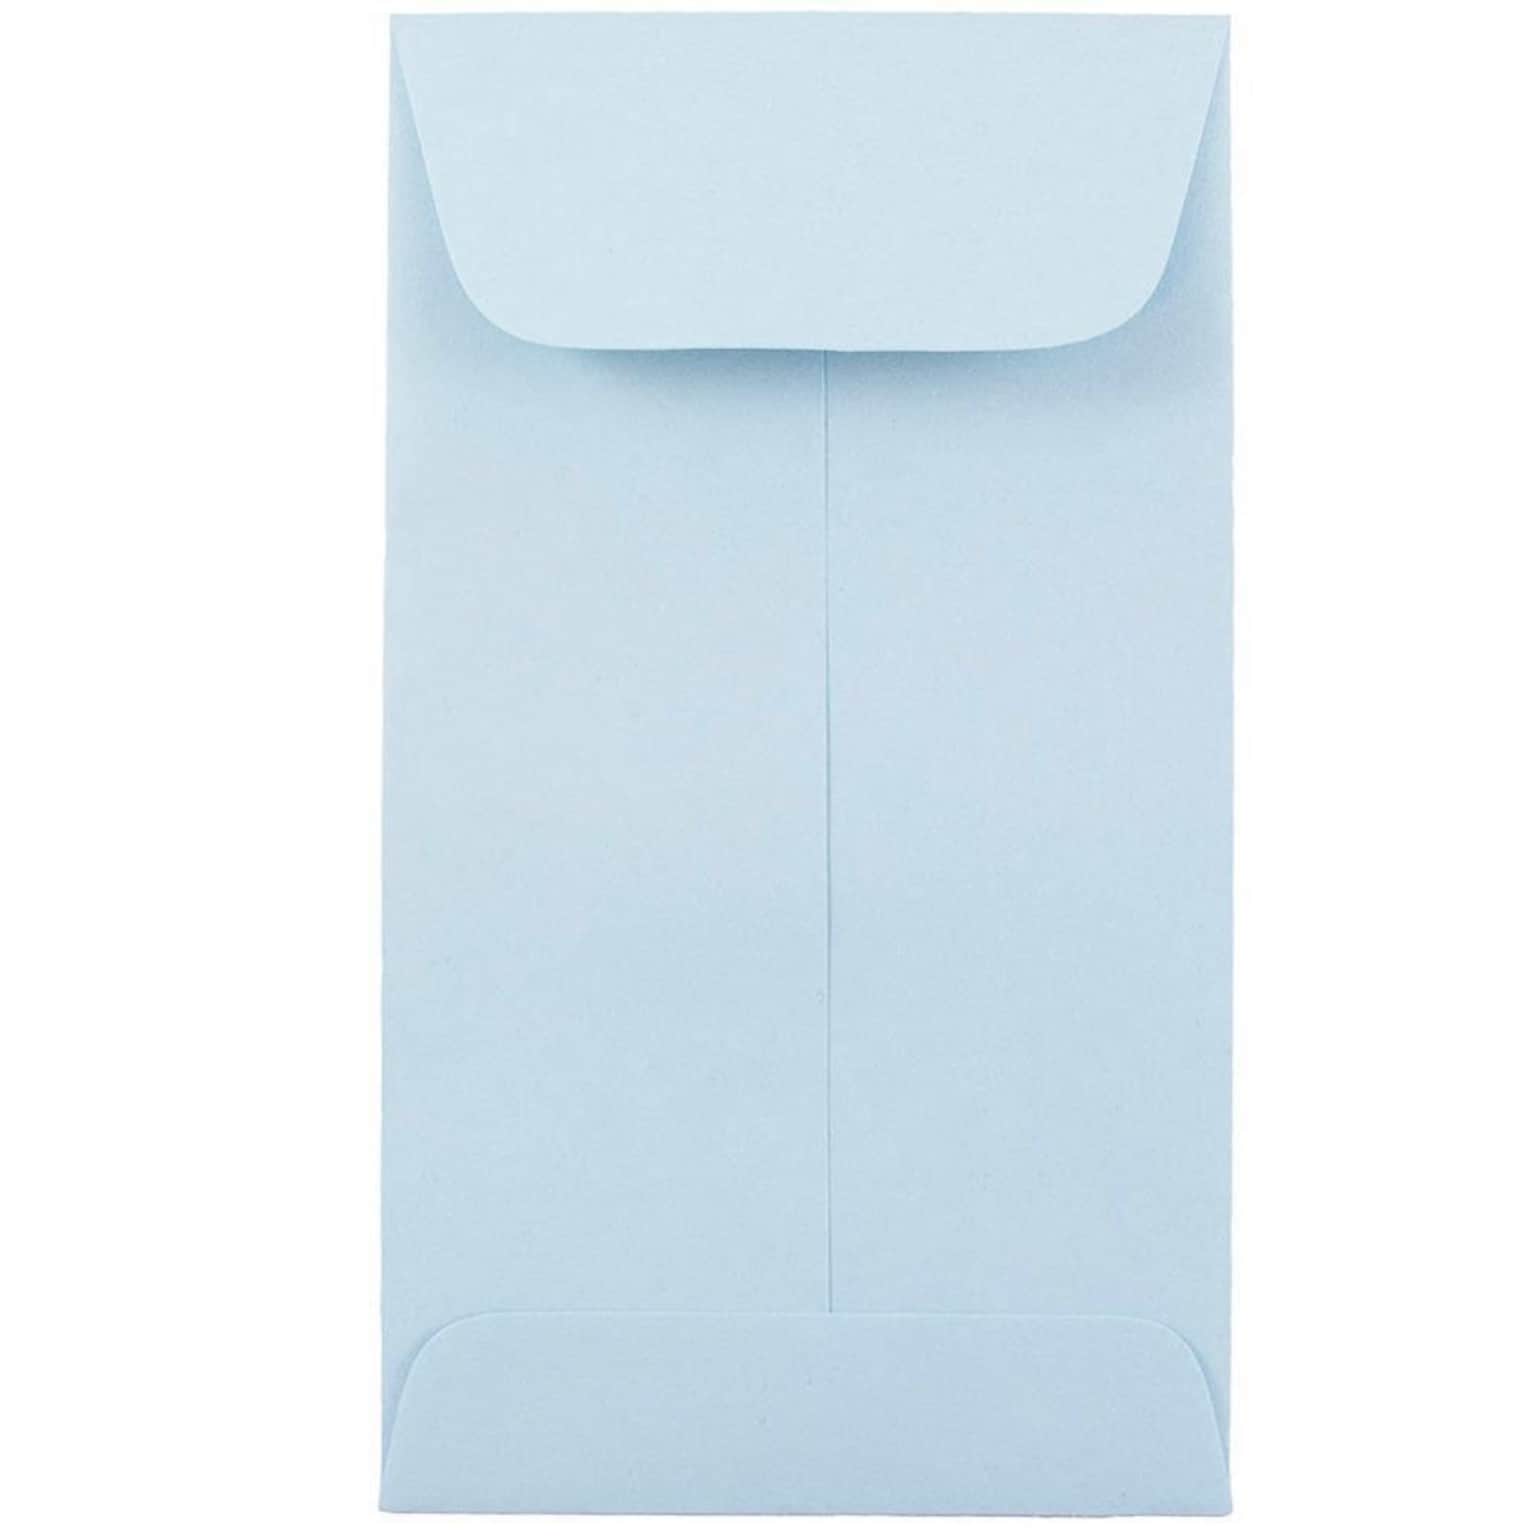 JAM Paper #6 Coin Business Envelopes, 3.375 x 6, Baby Blue, 100/Pack (356730563B)